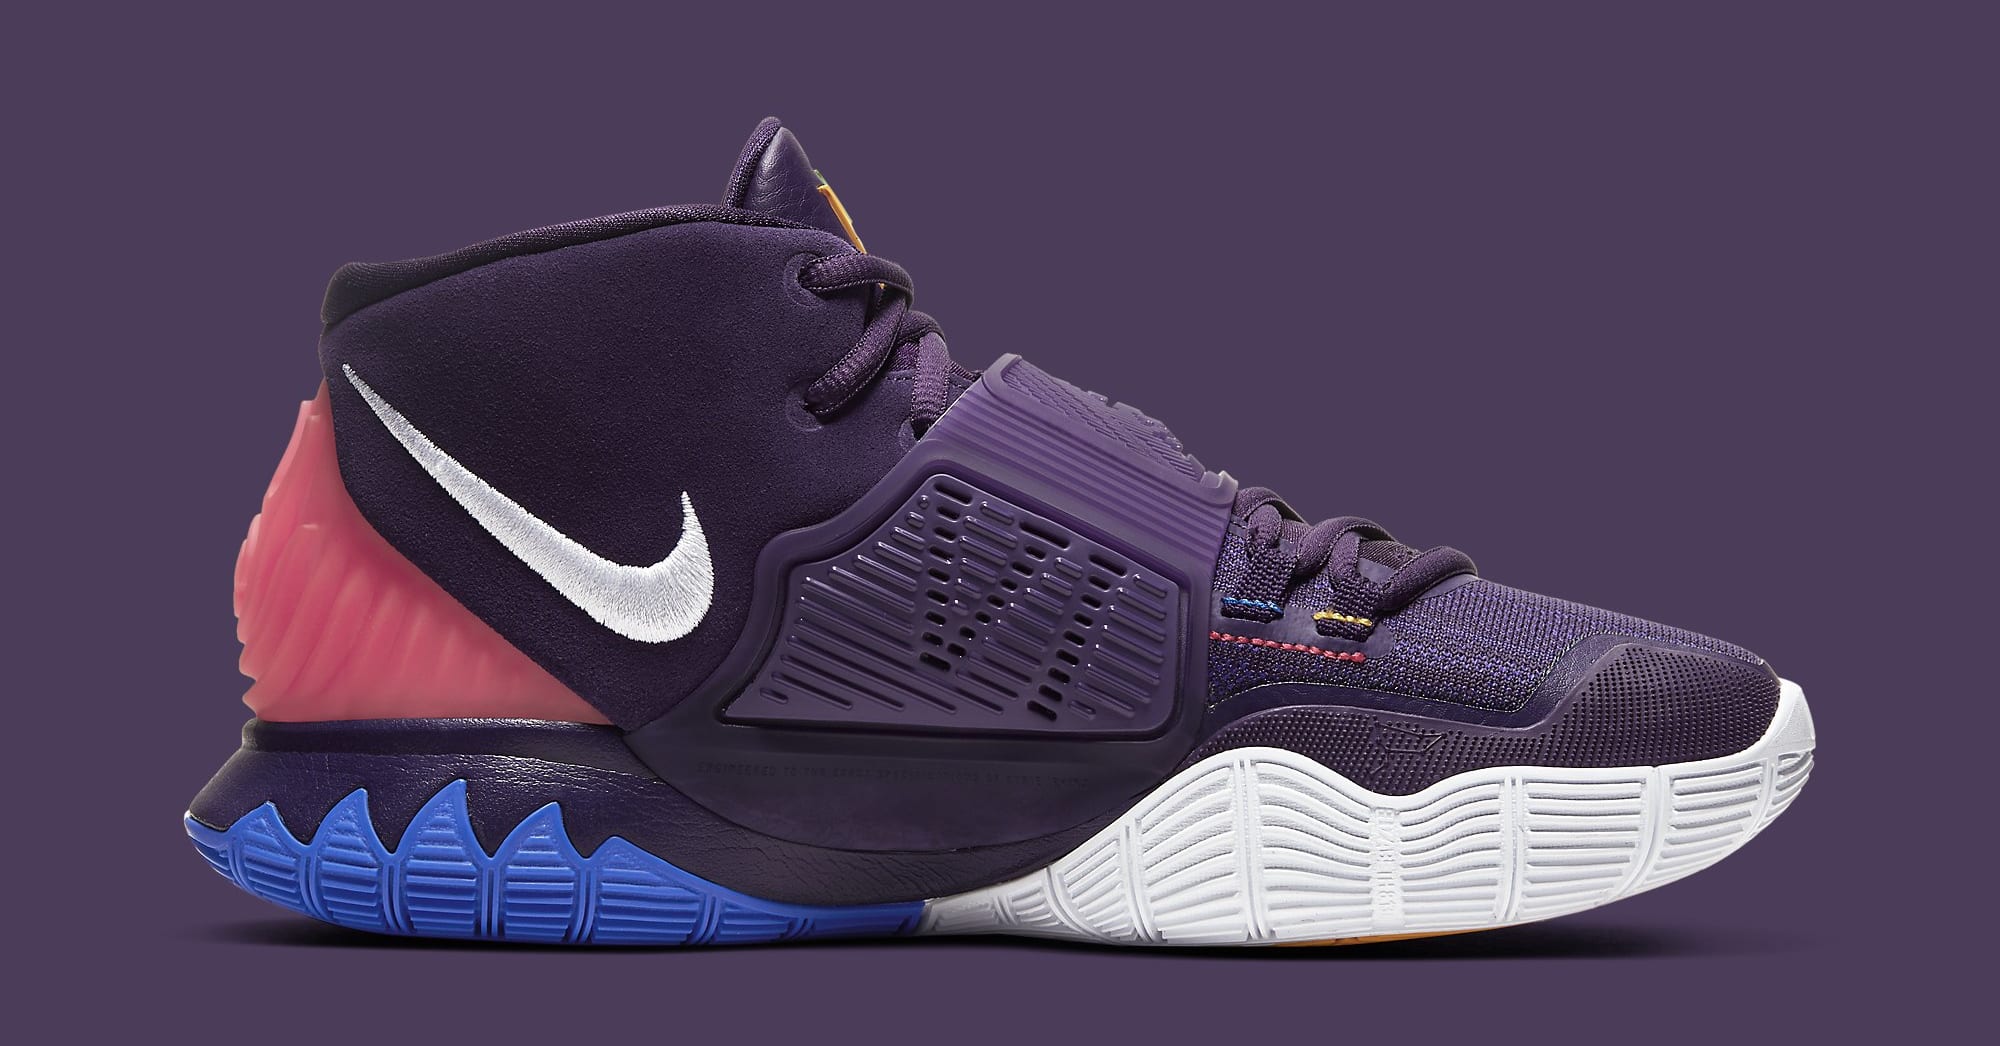 kyrie irving purple shoes